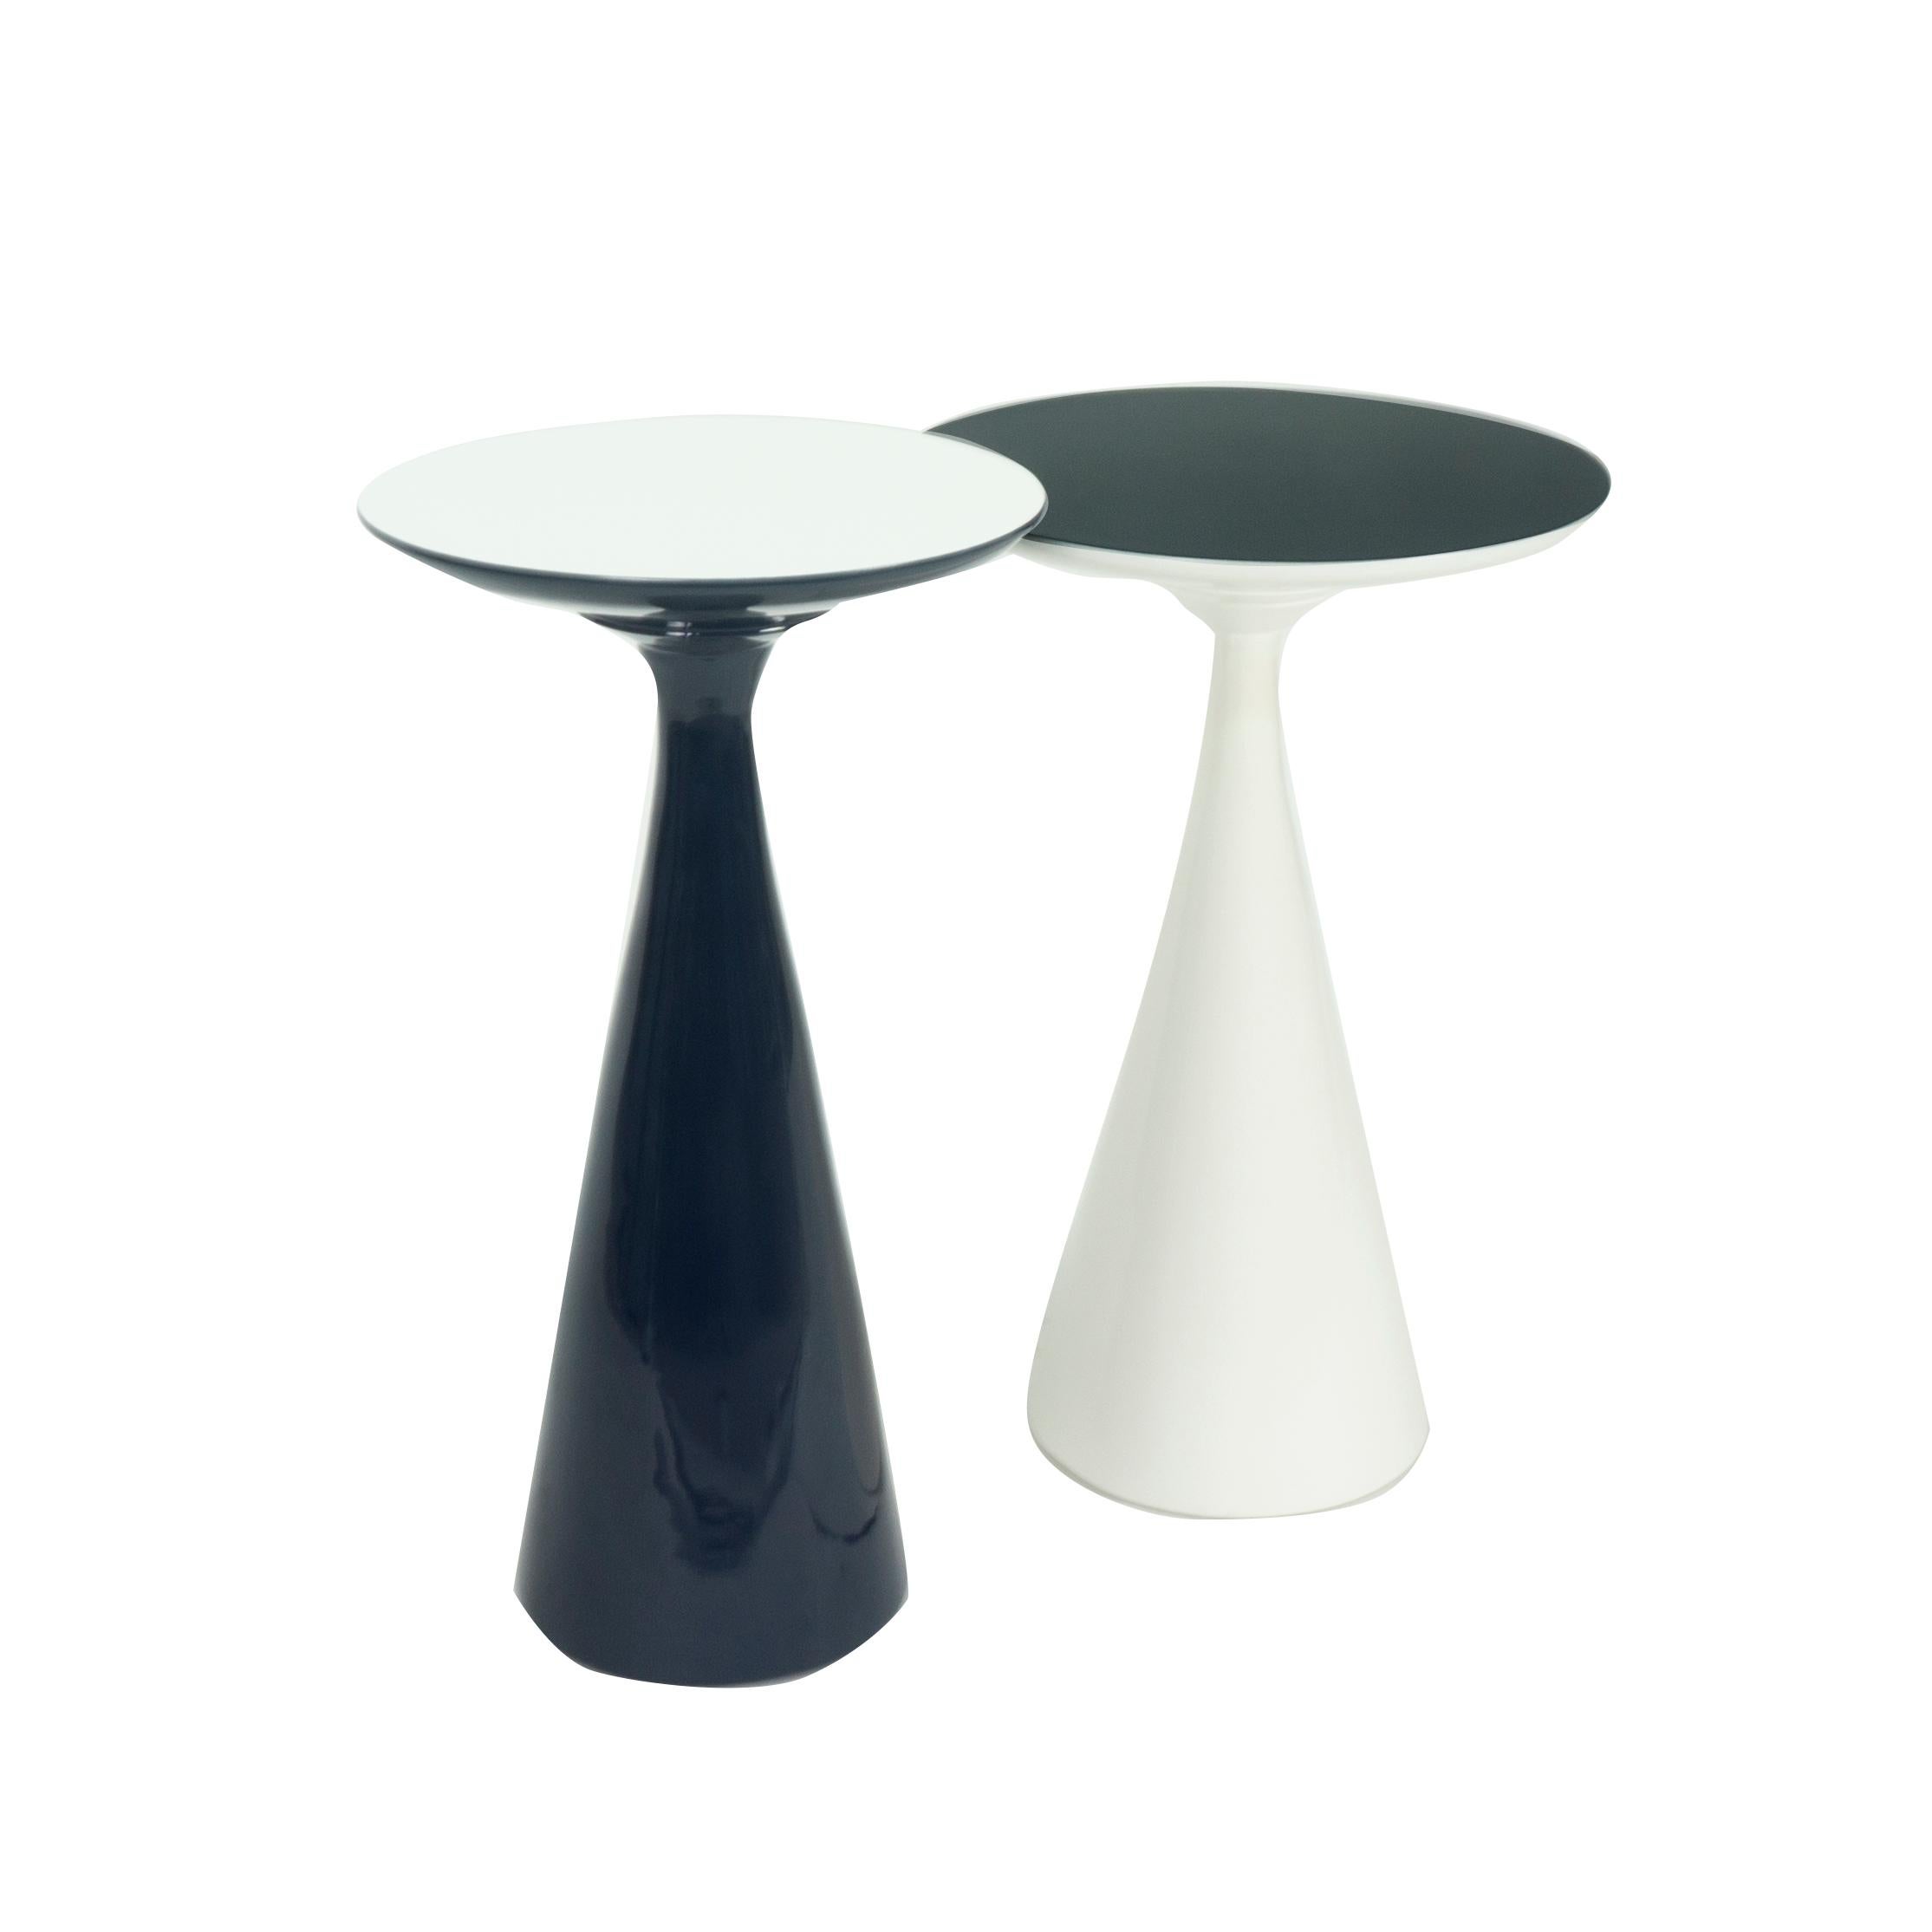 Our stiletto cocktail side tables are lacquered in white and navy blue. Together or apart they add function and beauty to a space. The pair of table are available now as is or can be custom built upon request. 

Measurements: 
White 23